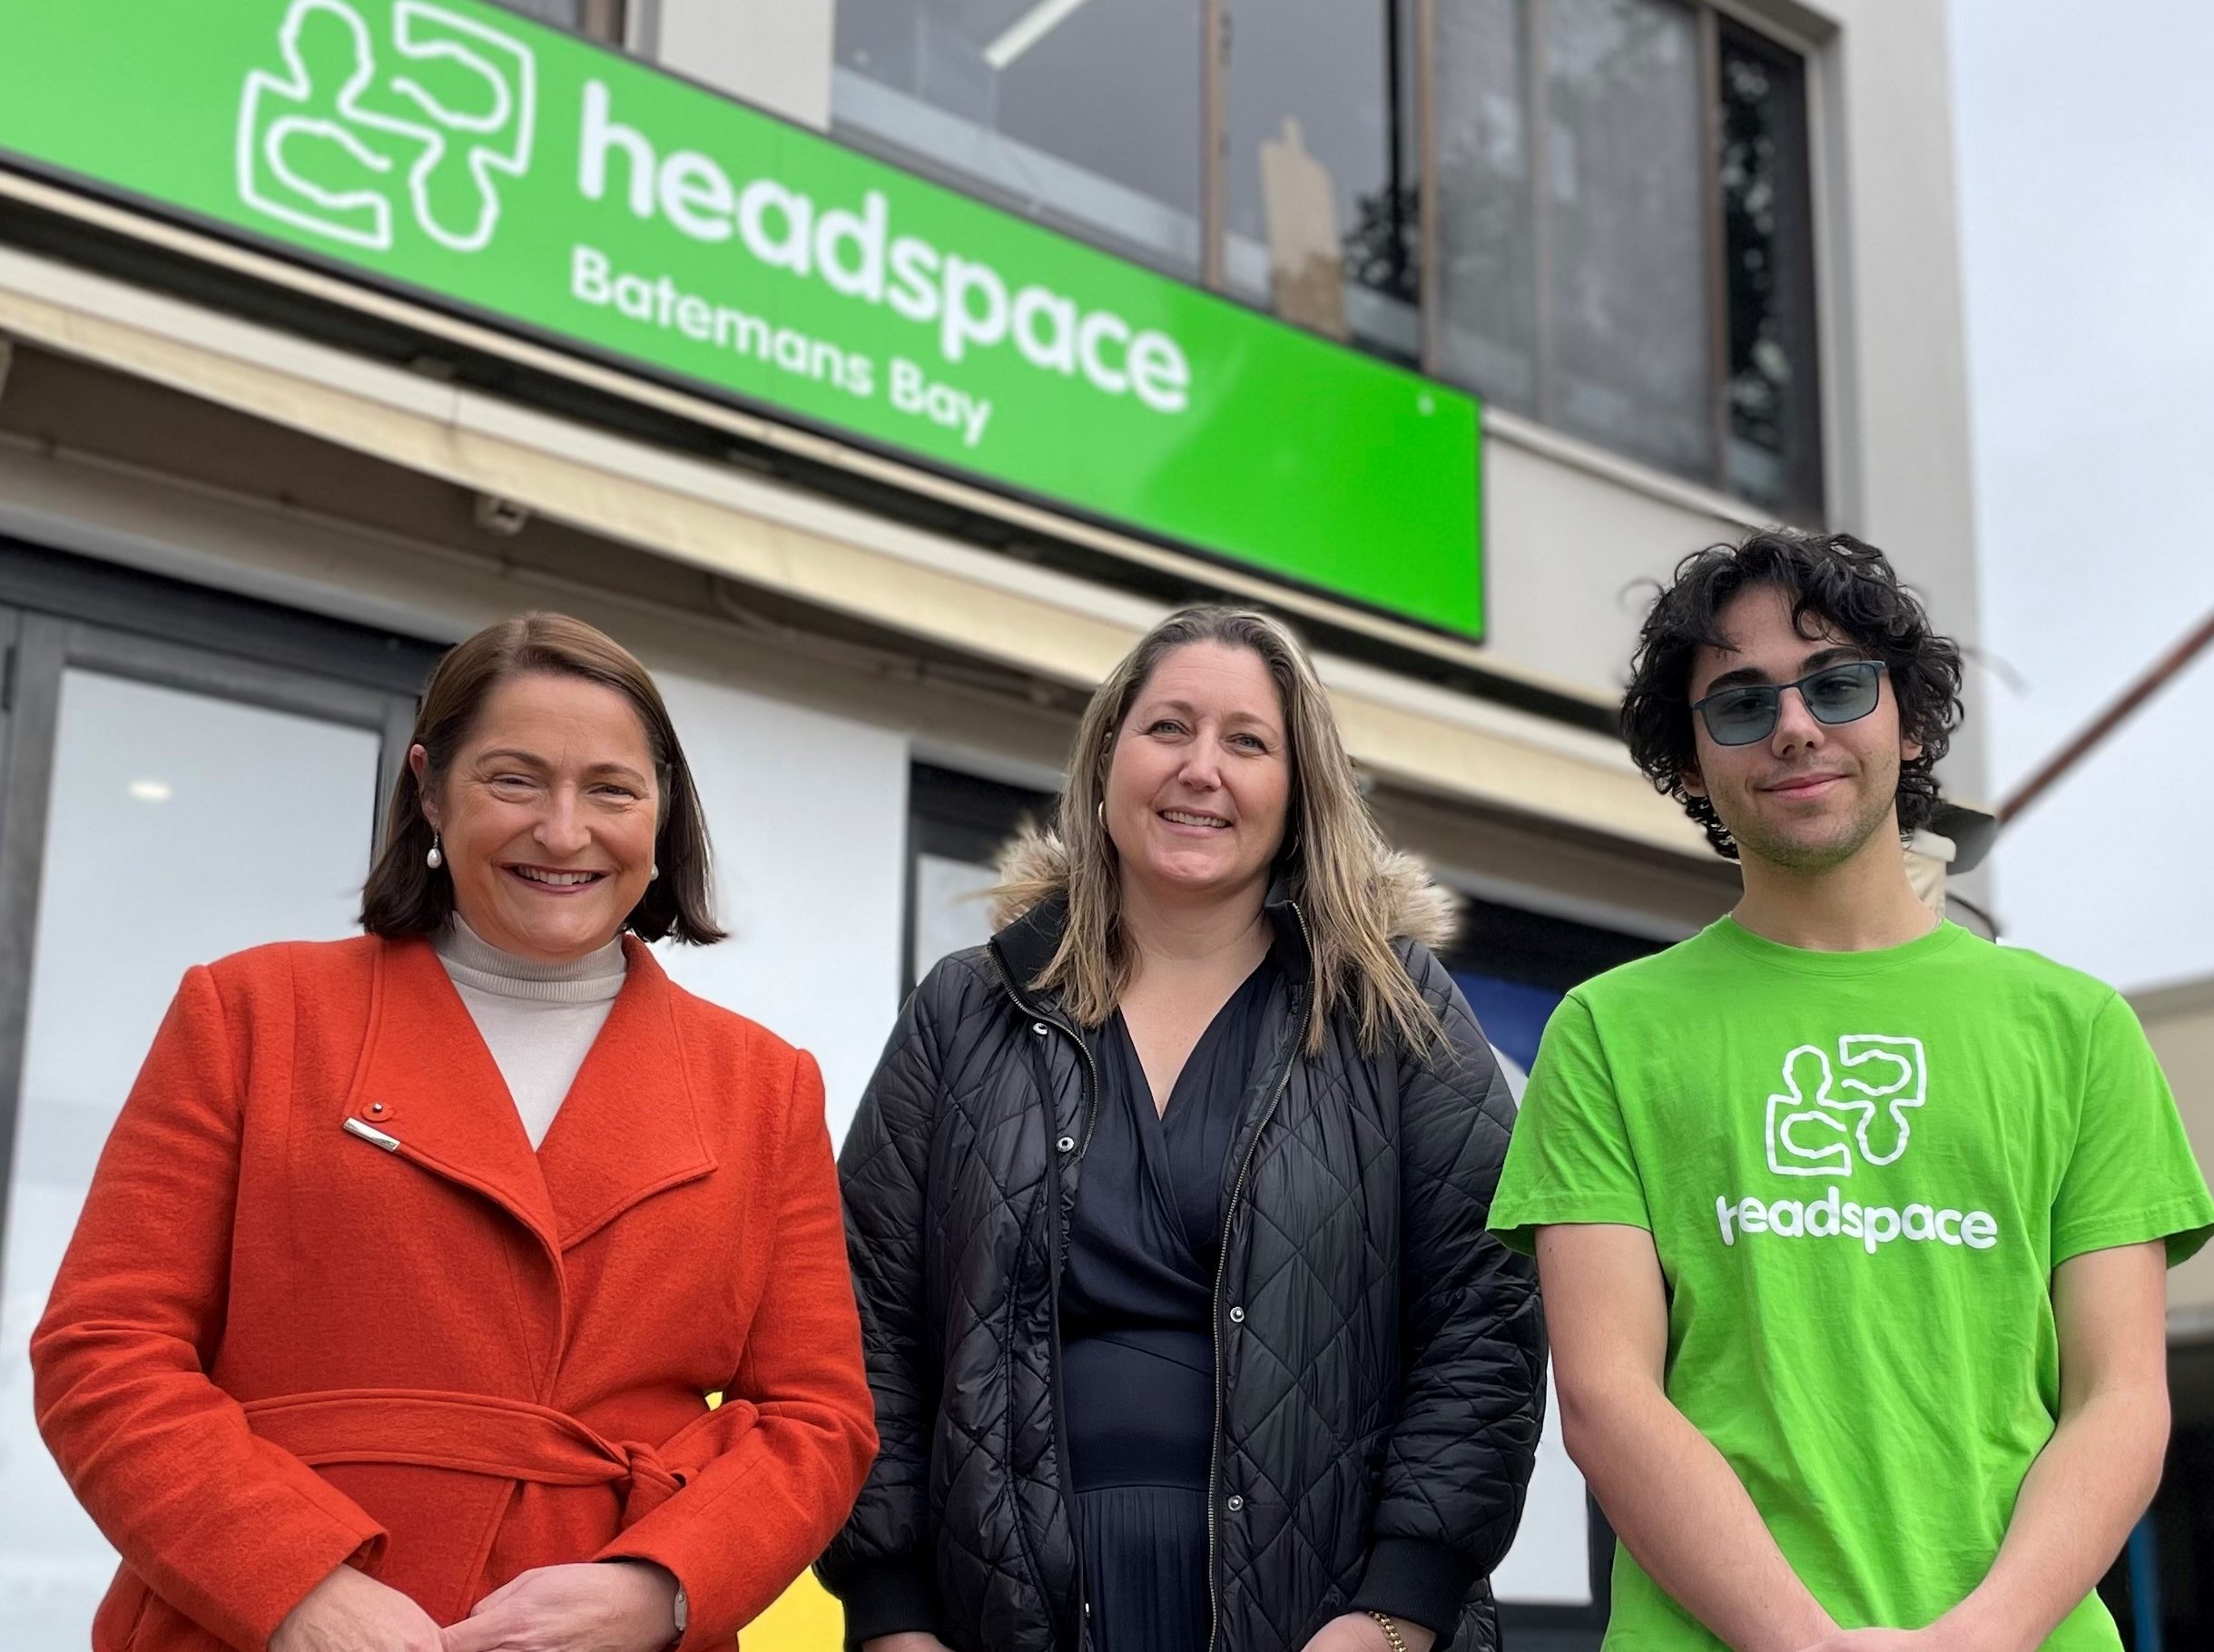 Batemans Bay Headspace funds a boost for young people in need